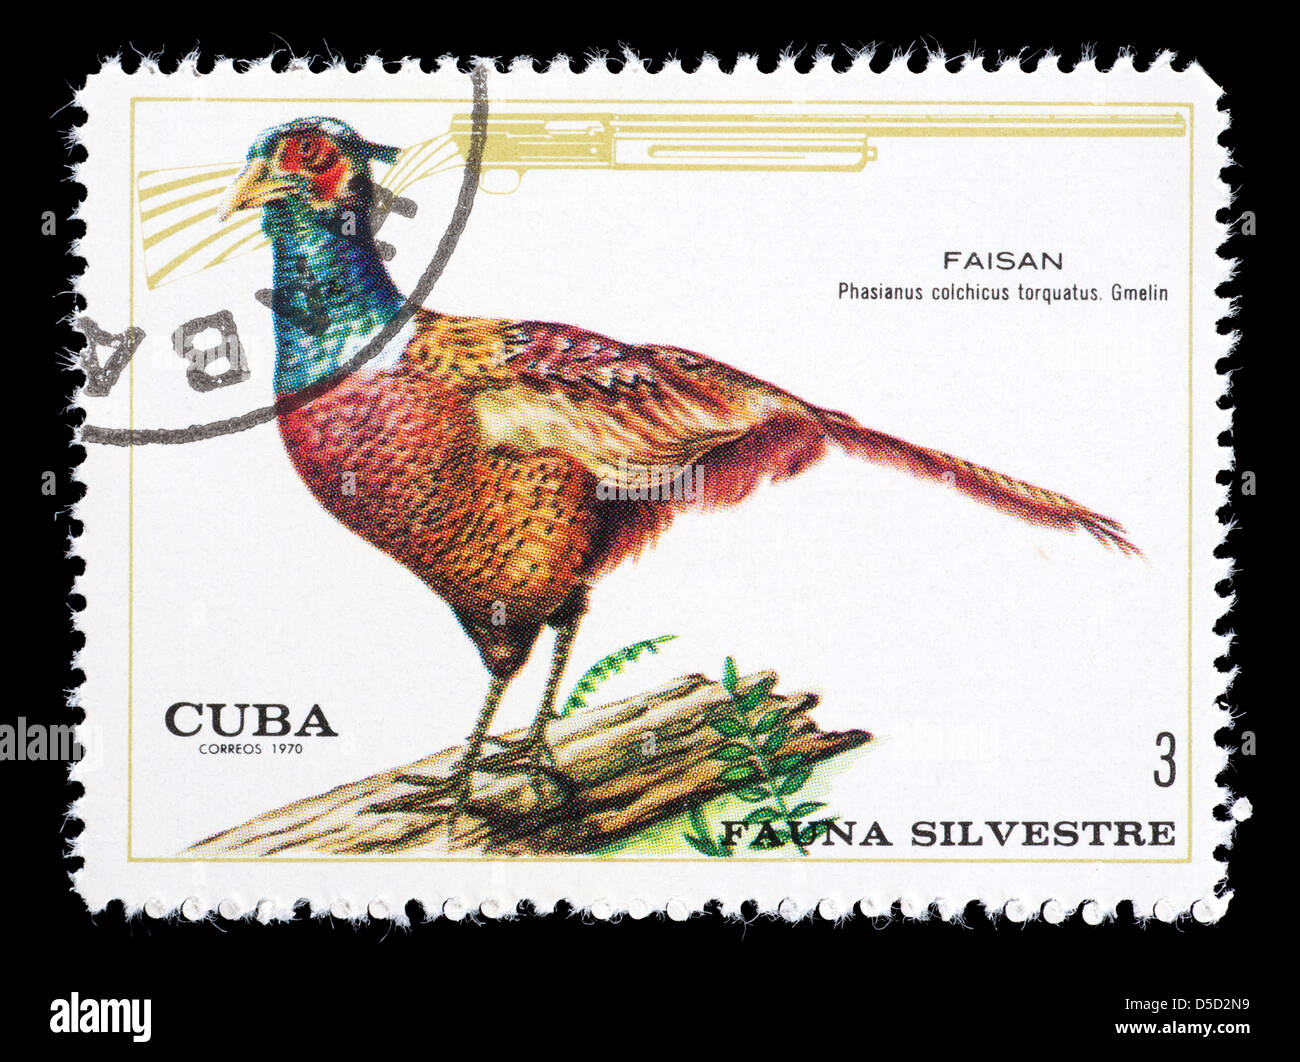 Postage stamp from Cuba depicting a common Ring-necked pheasant (Phasianus colchicus) Stock Photo